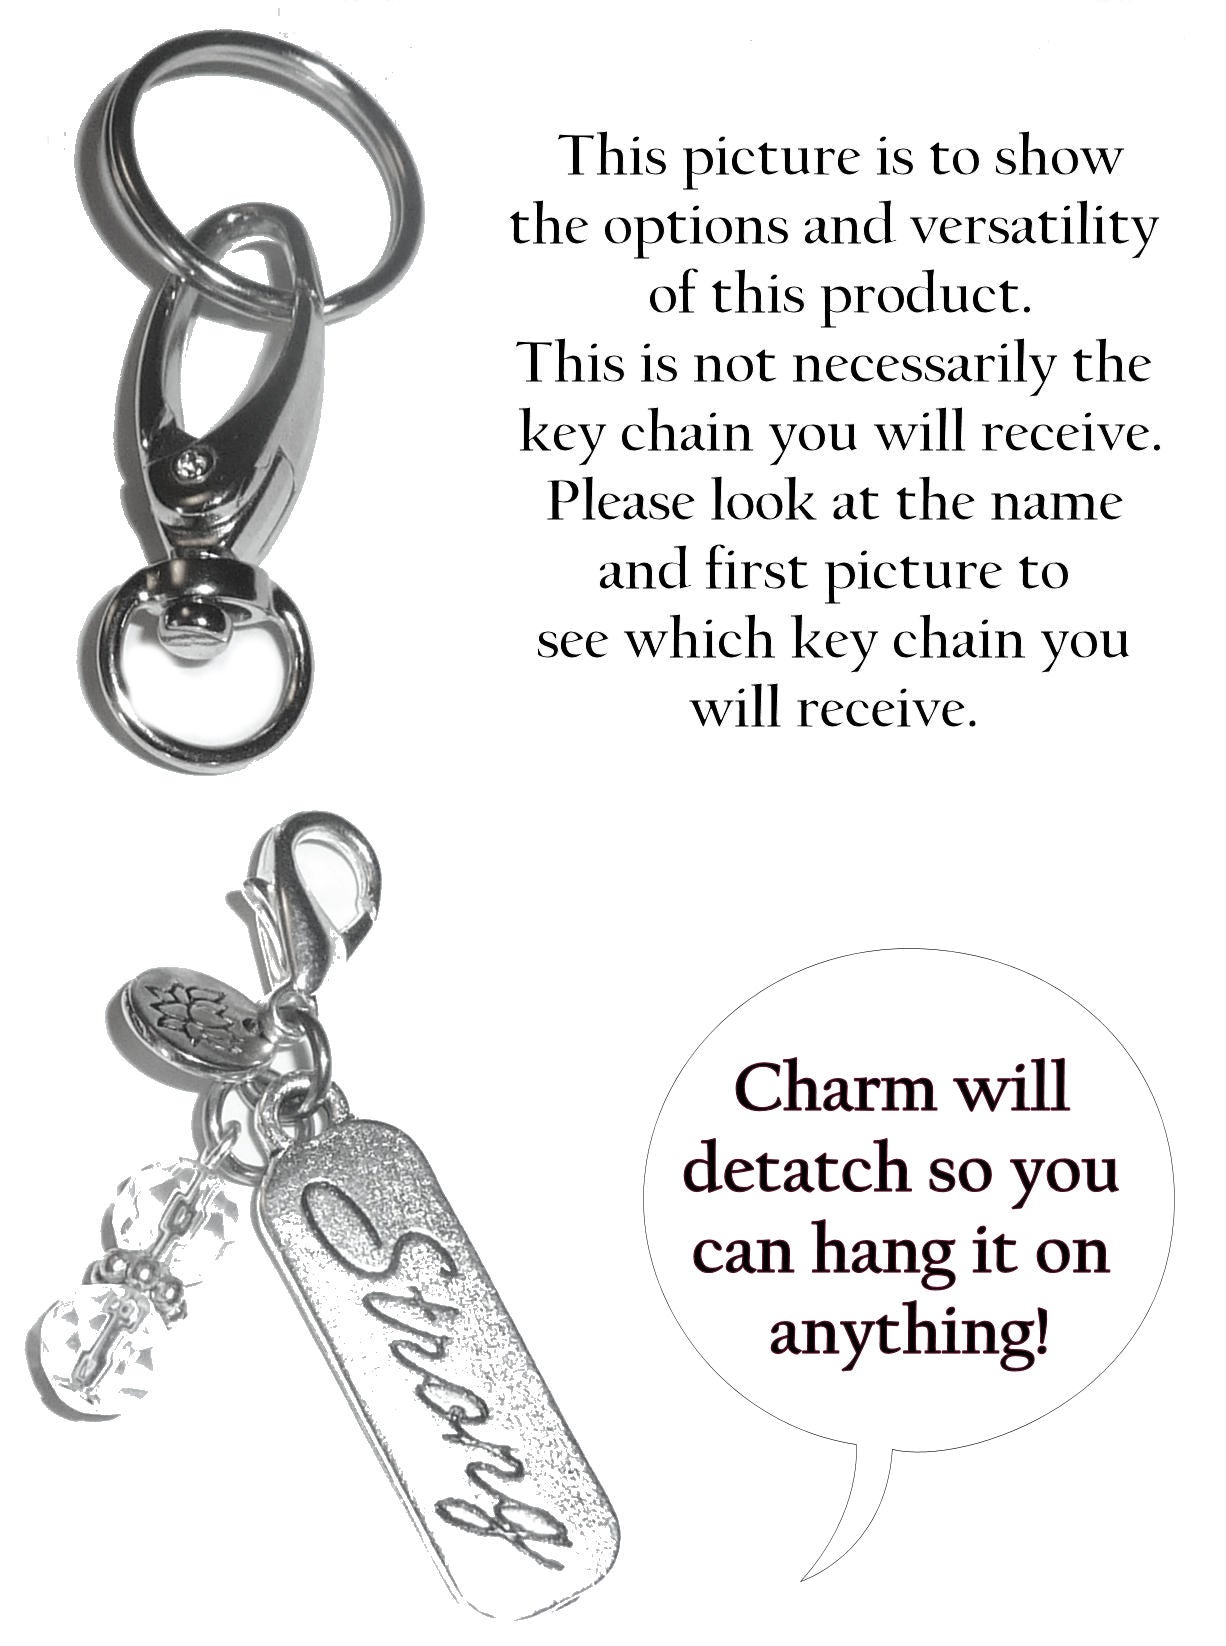 (L) Initial Charm Key Chain Ring, Women's Purse or Necklace Charm, Comes in a Gift Box!